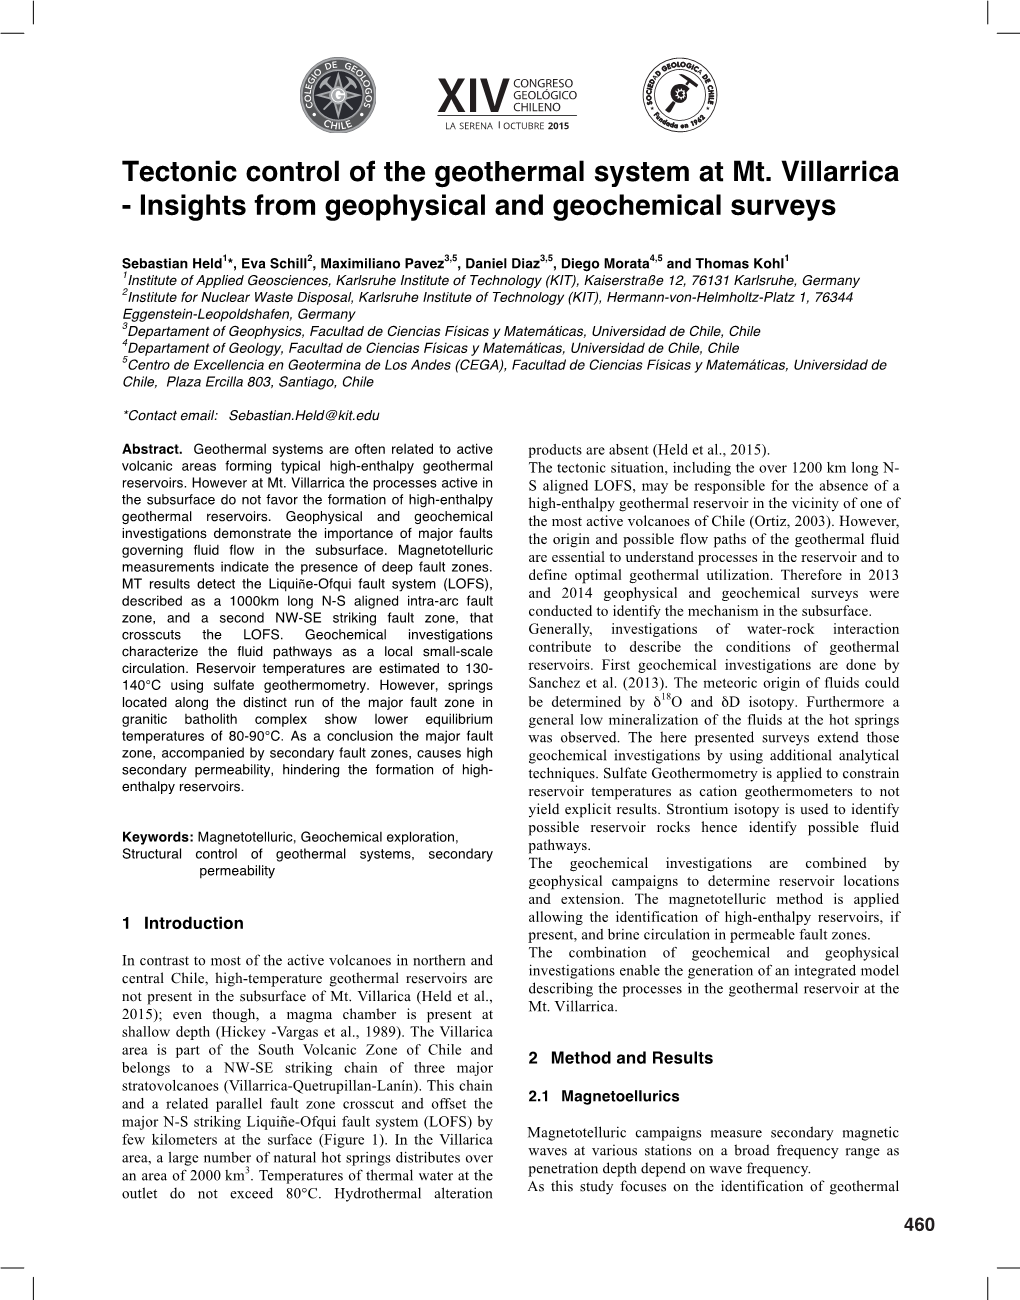 Tectonic Control of the Geothermal System at Mt. Villarrica - Insights from Geophysical and Geochemical Surveys